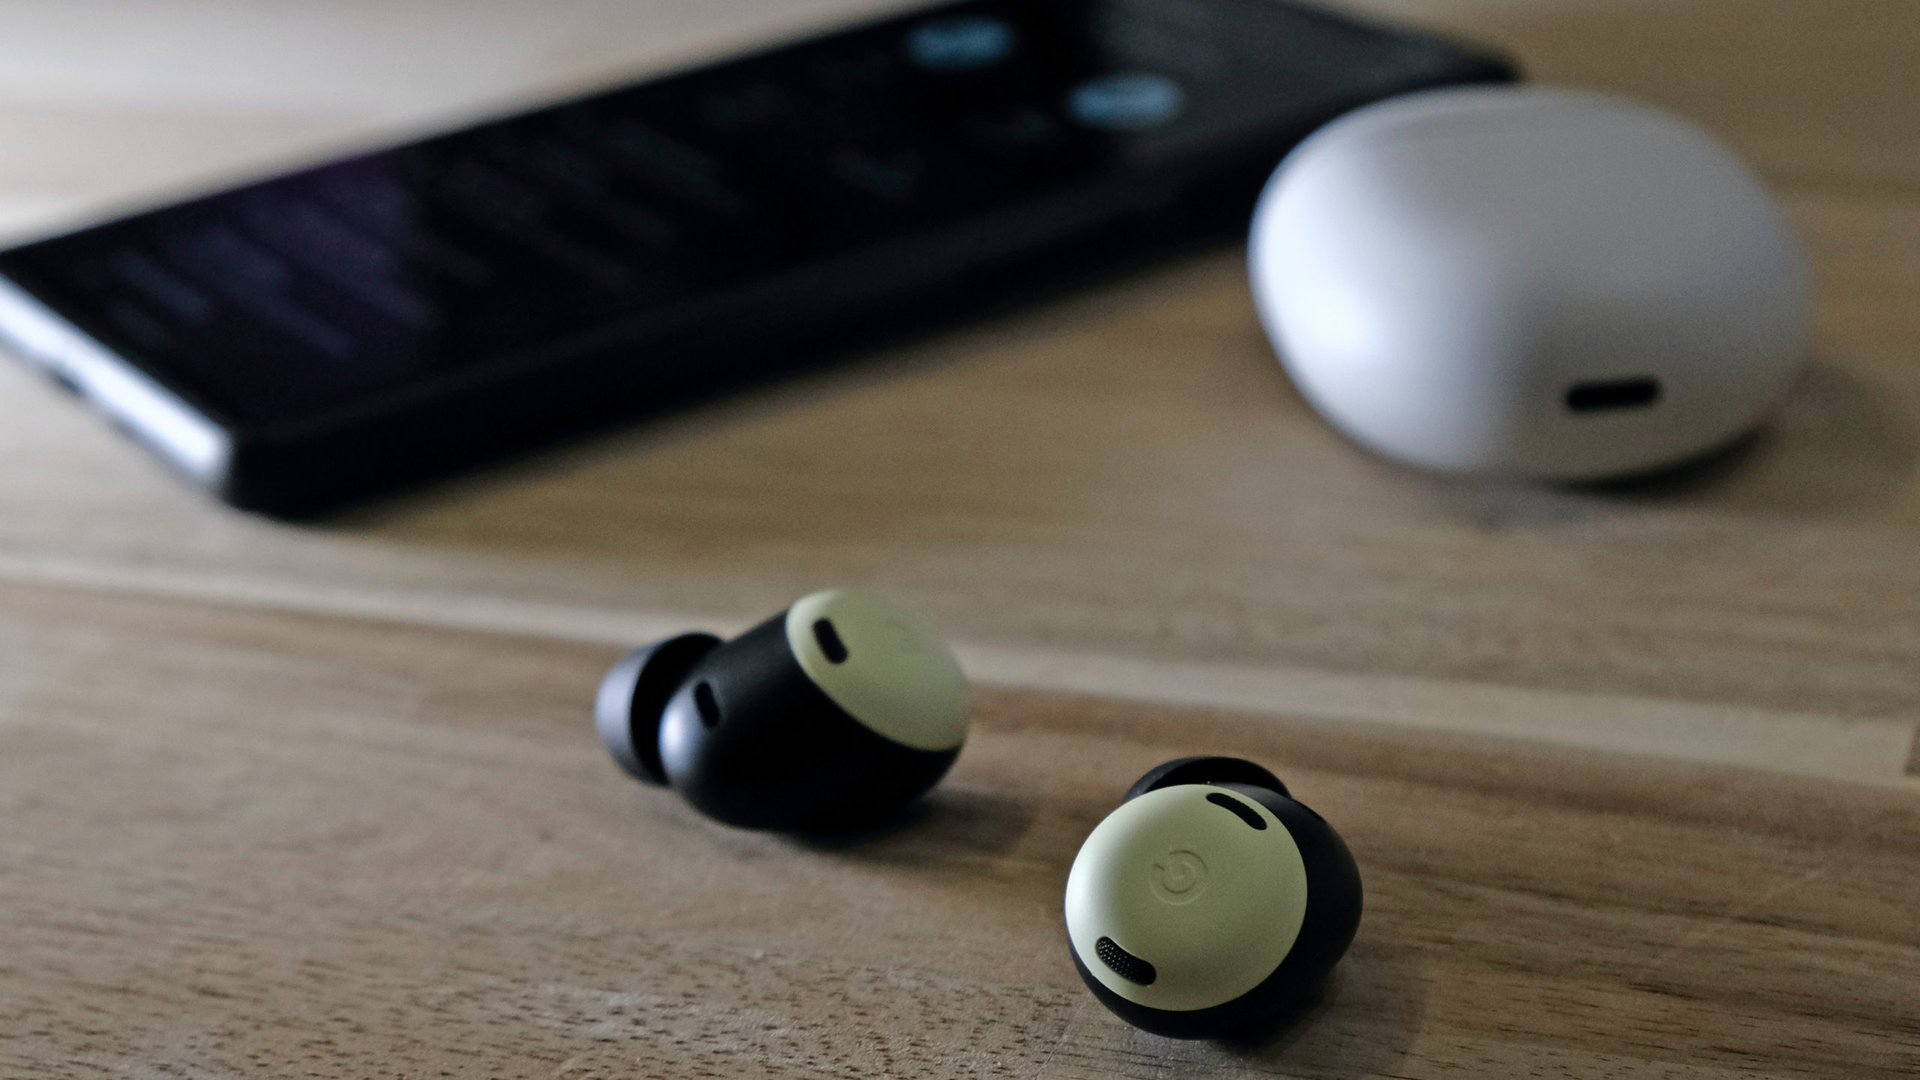 Pixel Buds Pro impressions: Google's AirPods Pro killer?